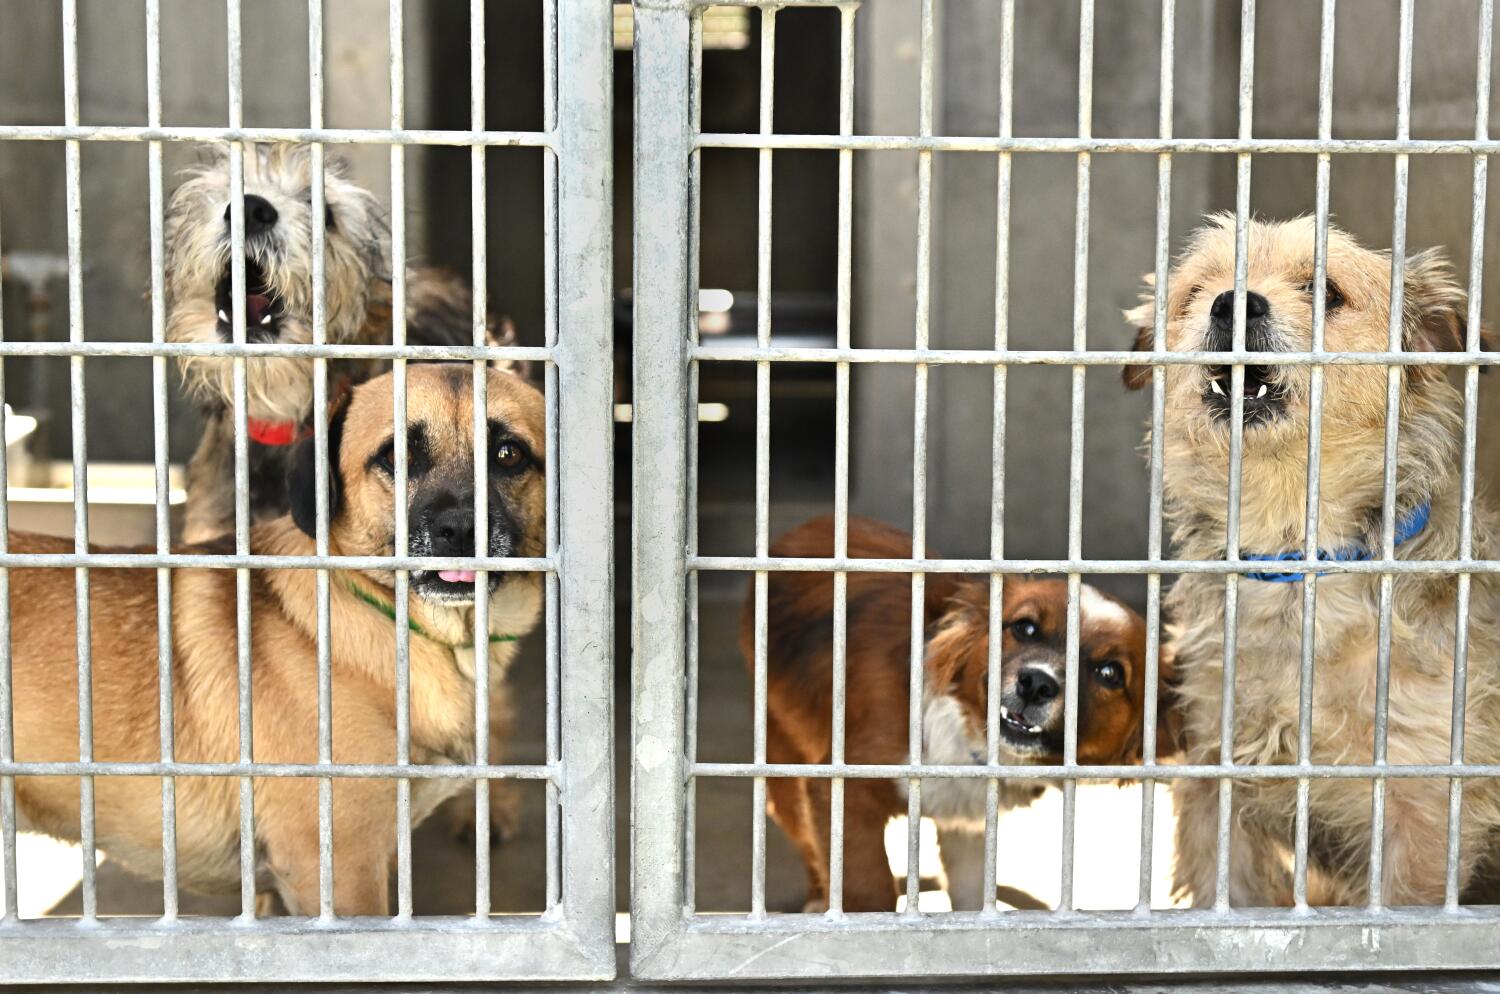 L.A. council committee backs moratorium on dog breeding licenses 